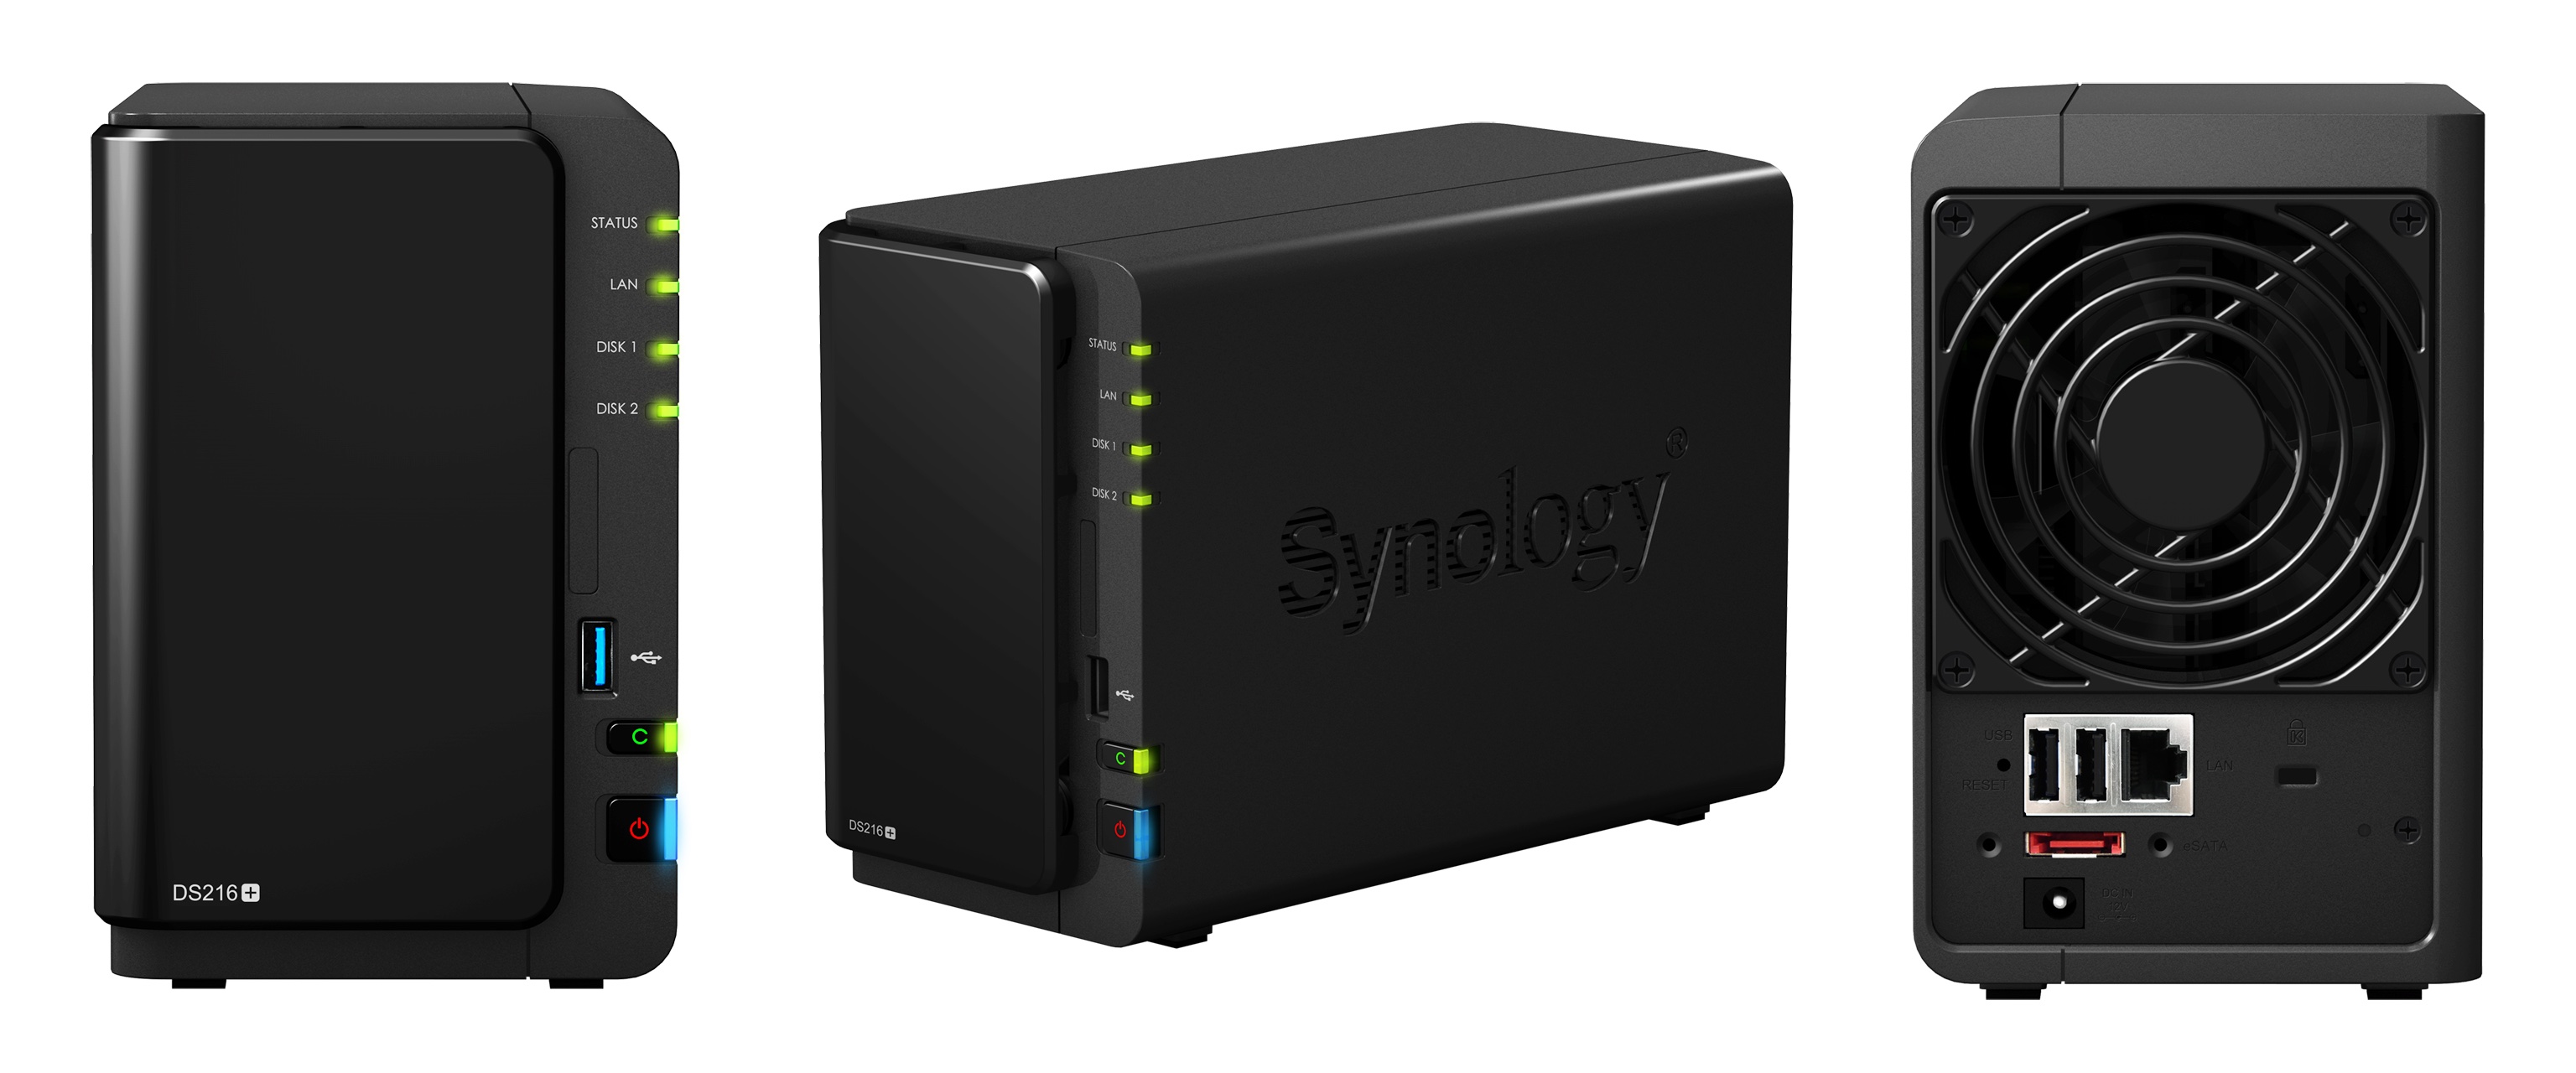 synology compress video files